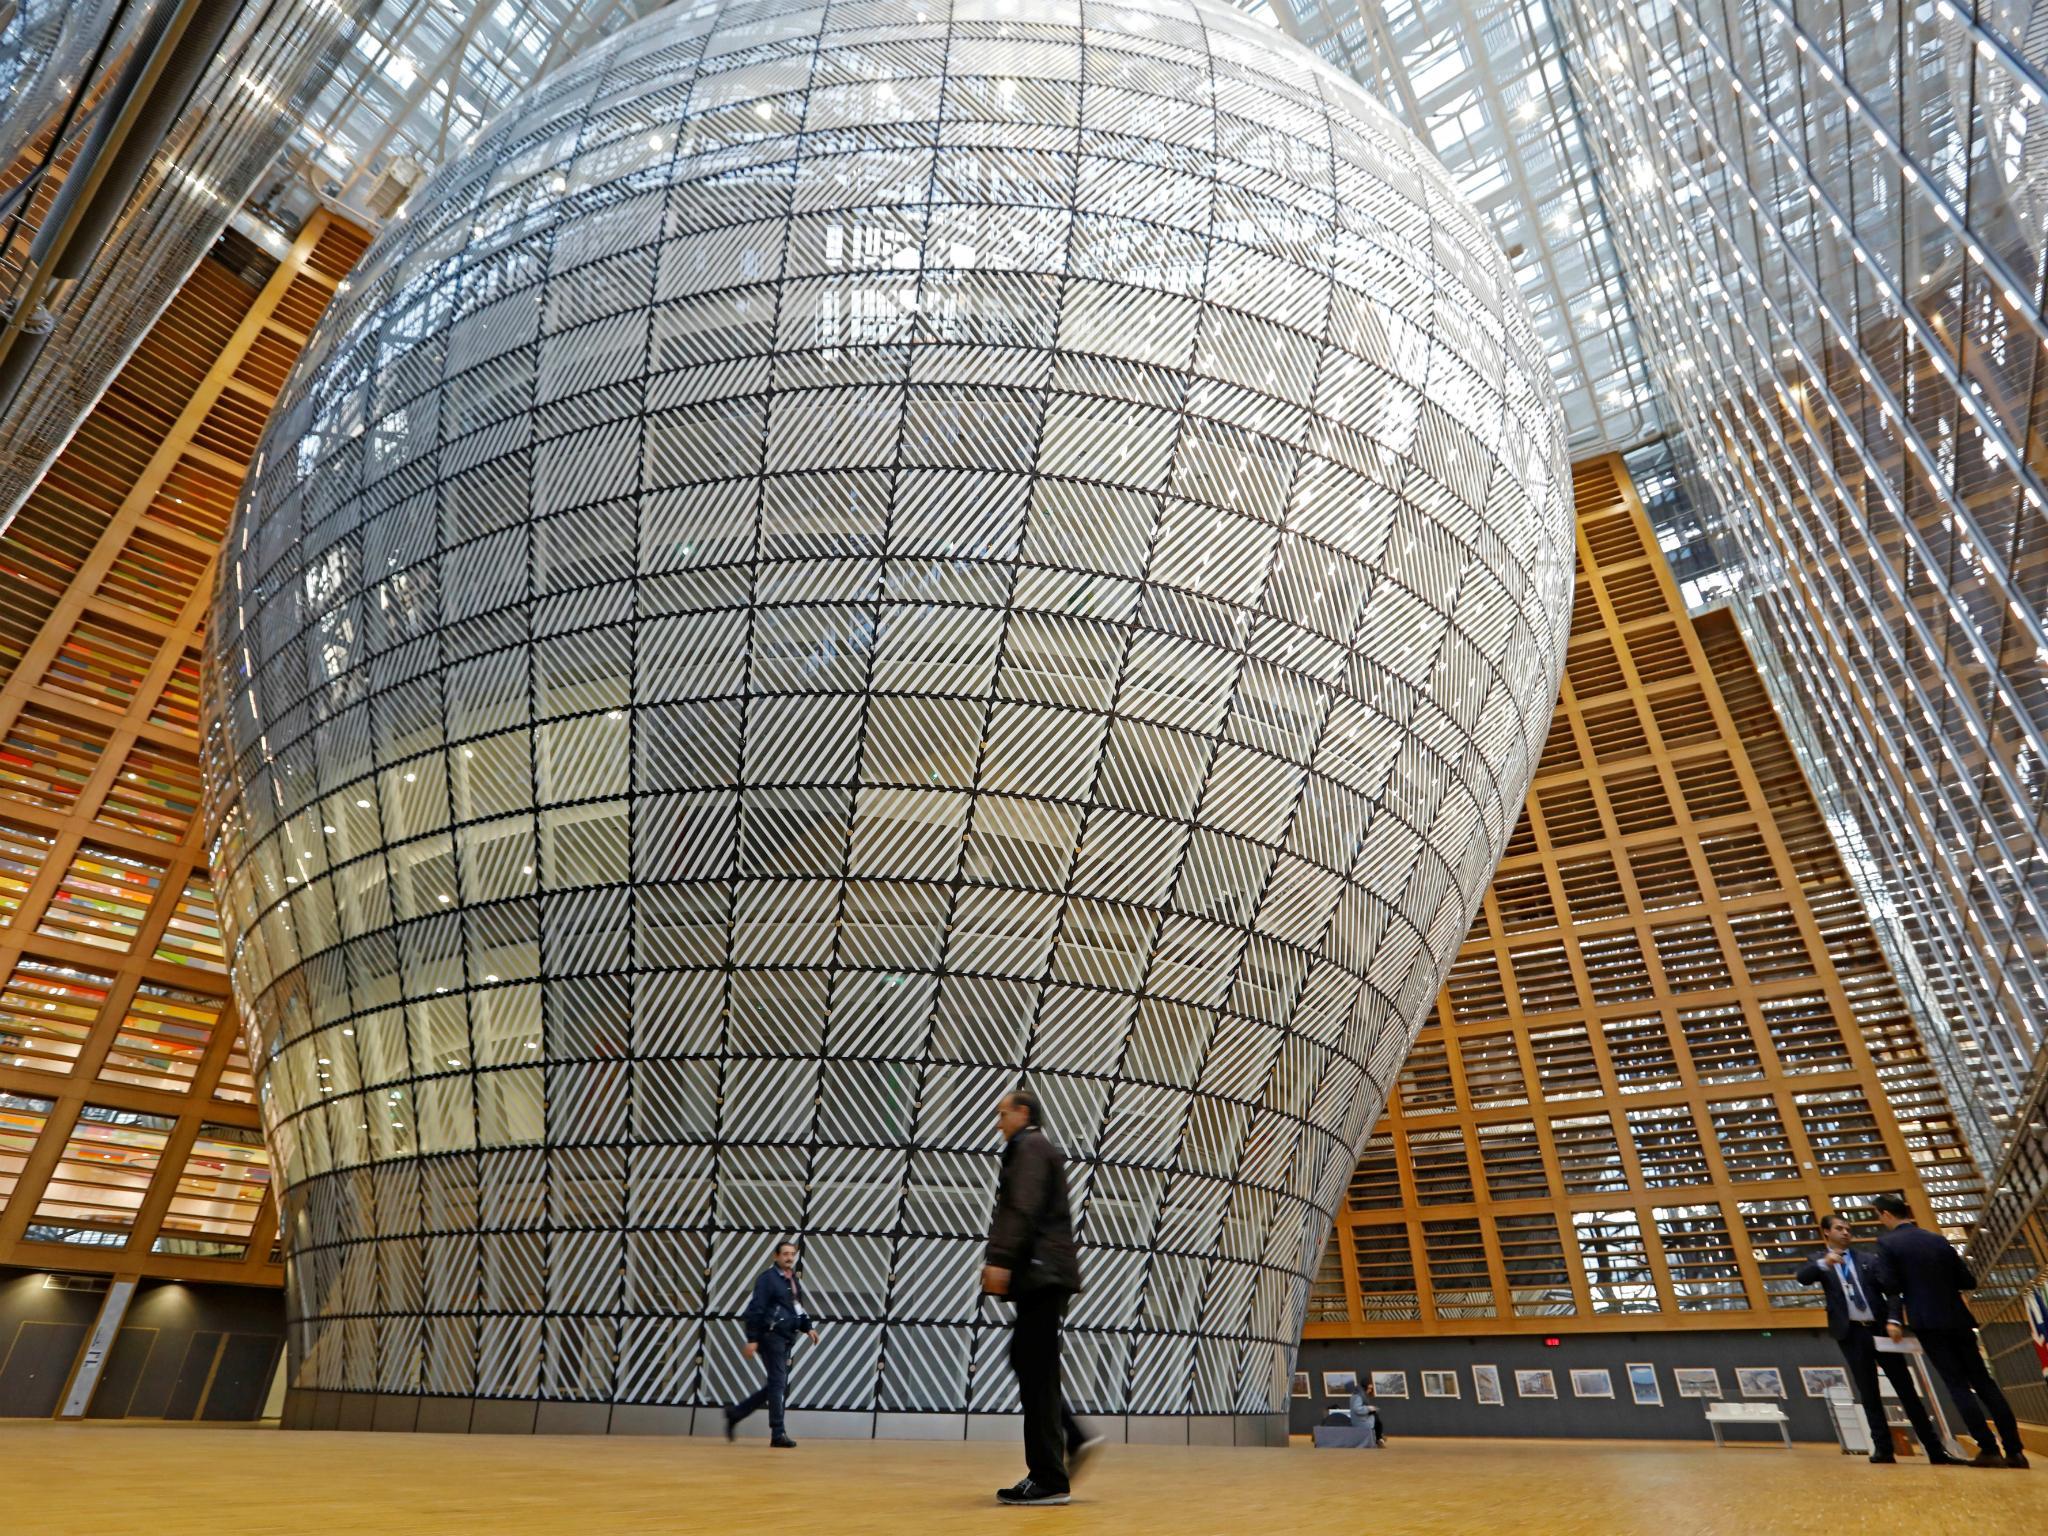 A view shows inside of Europa, the new European Council building in Brussels, Belgium December 9, 2016